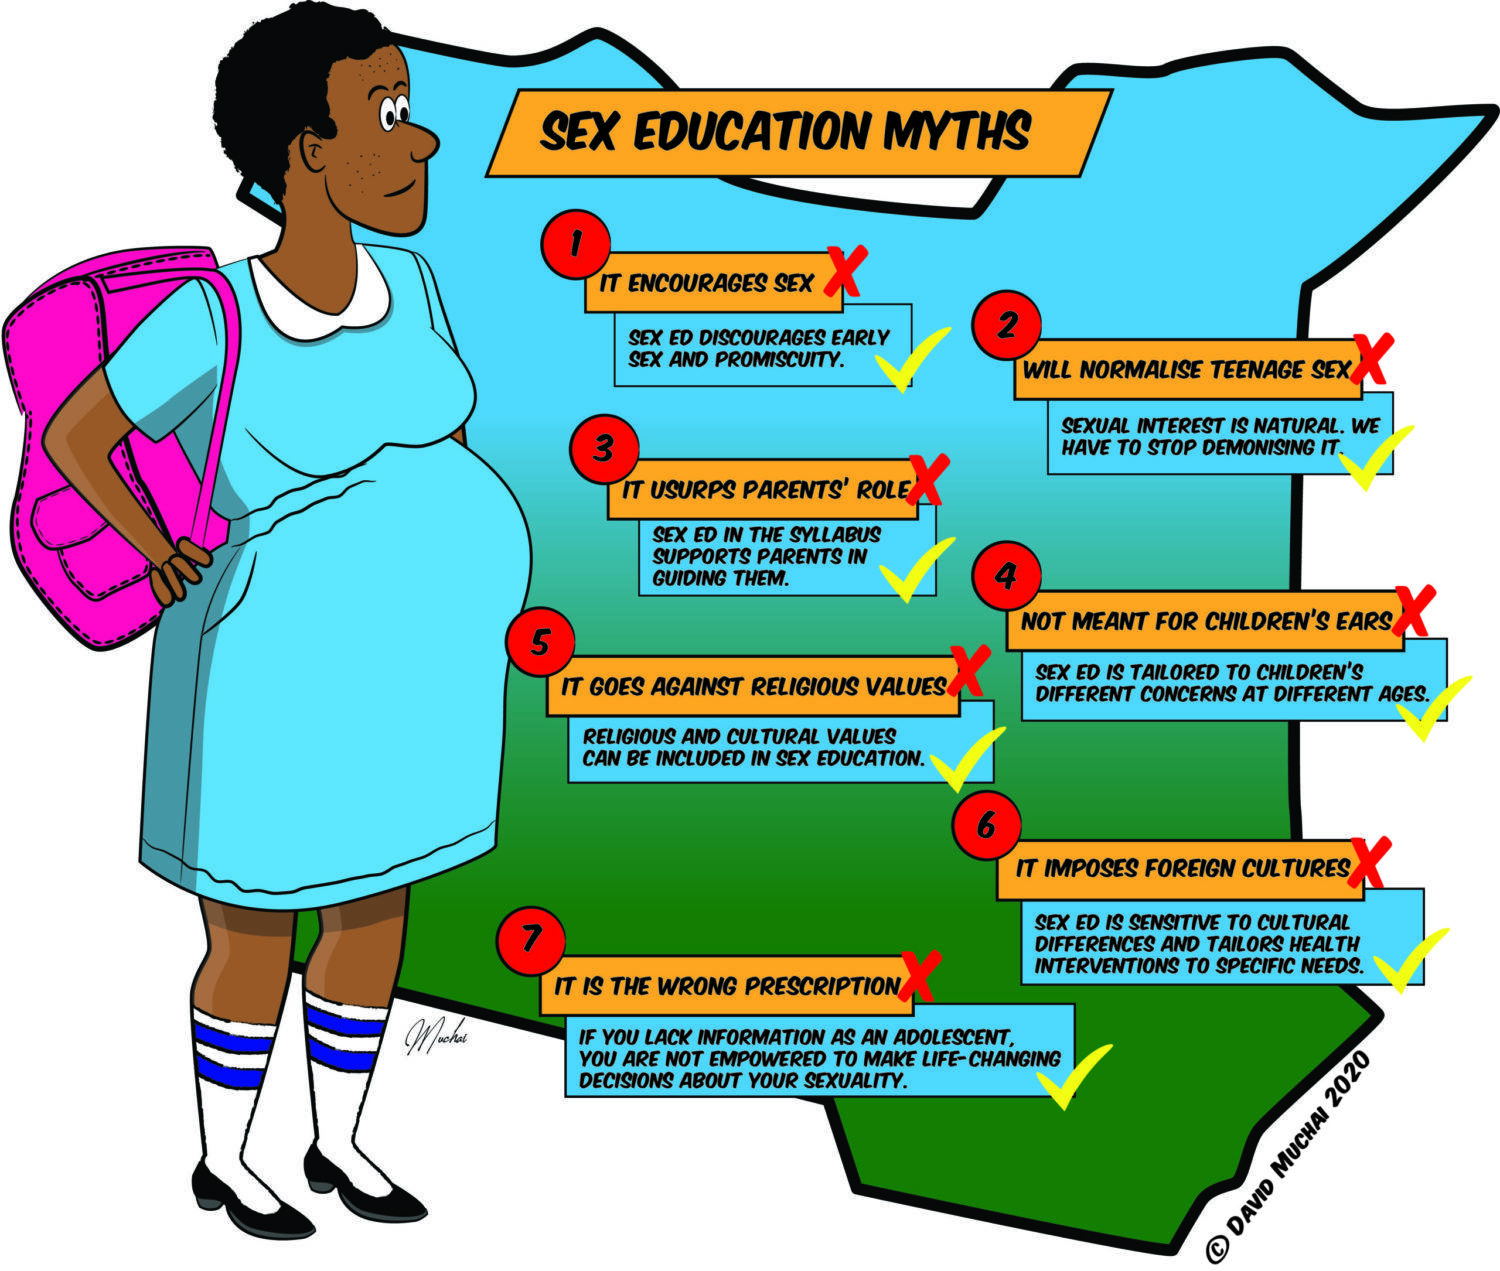 Seven myths about sex education debunked | African Arguments